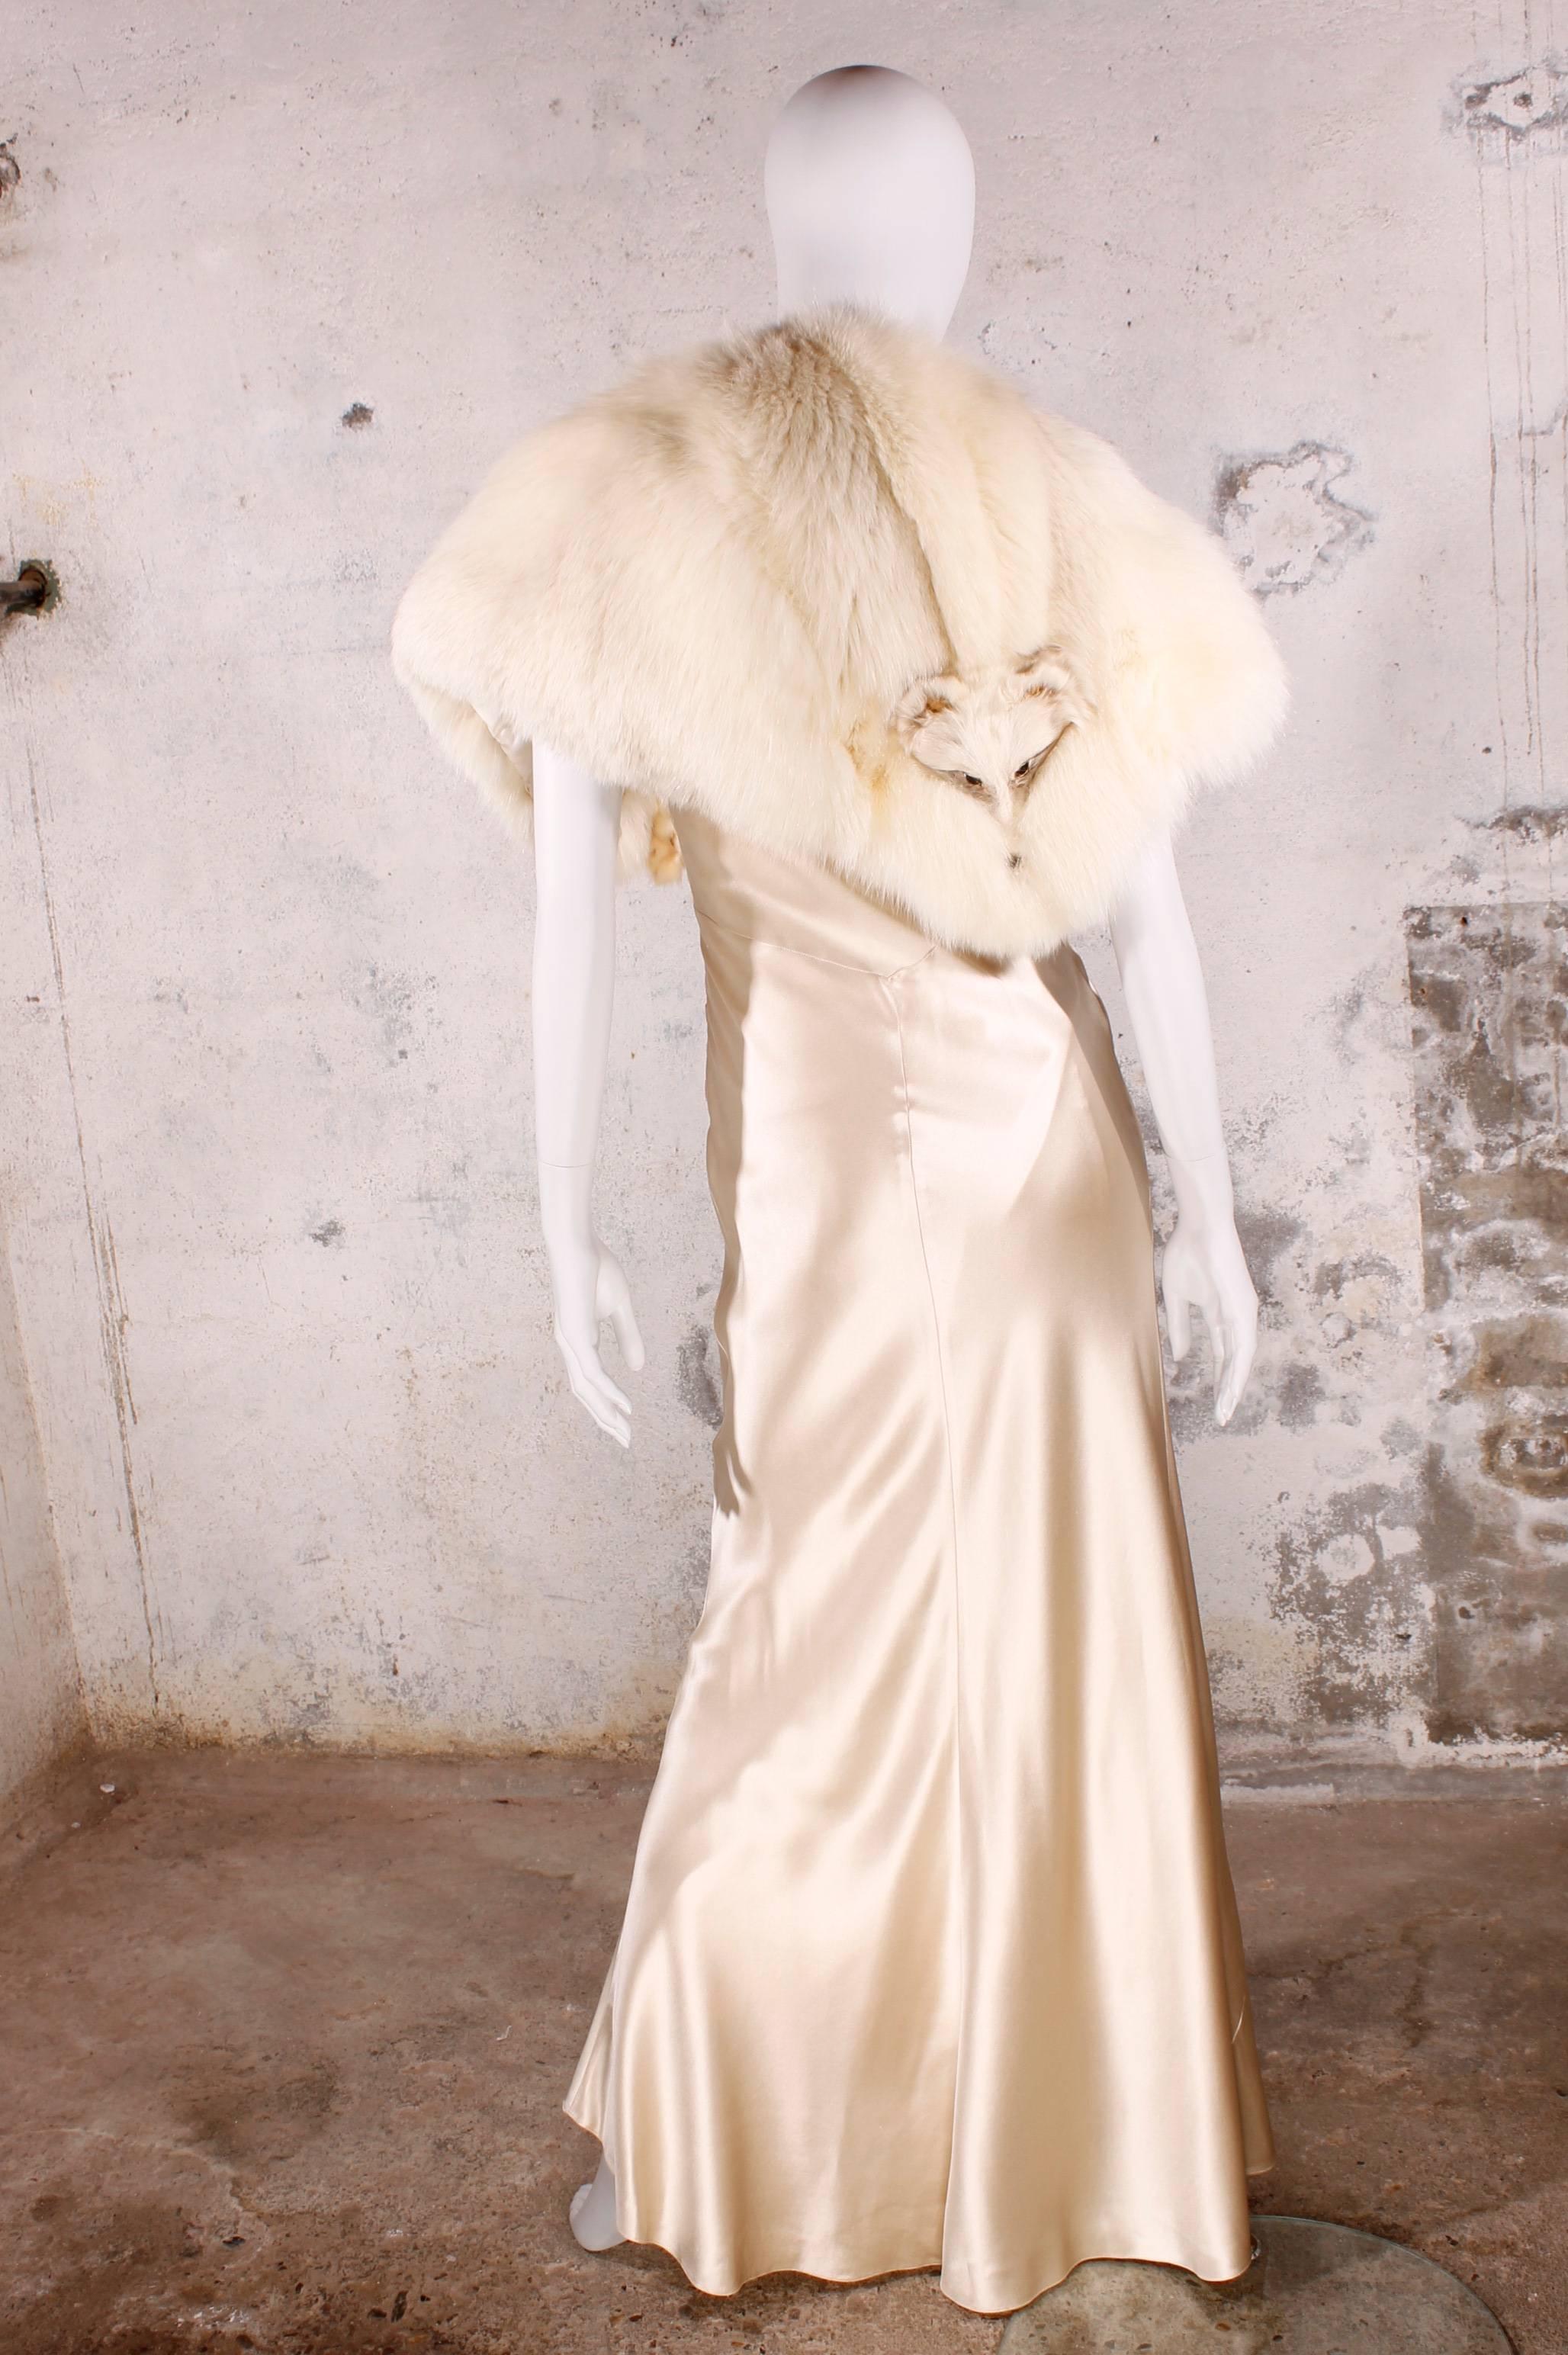 Christian Dior Champagne-colored Evening Gown 2